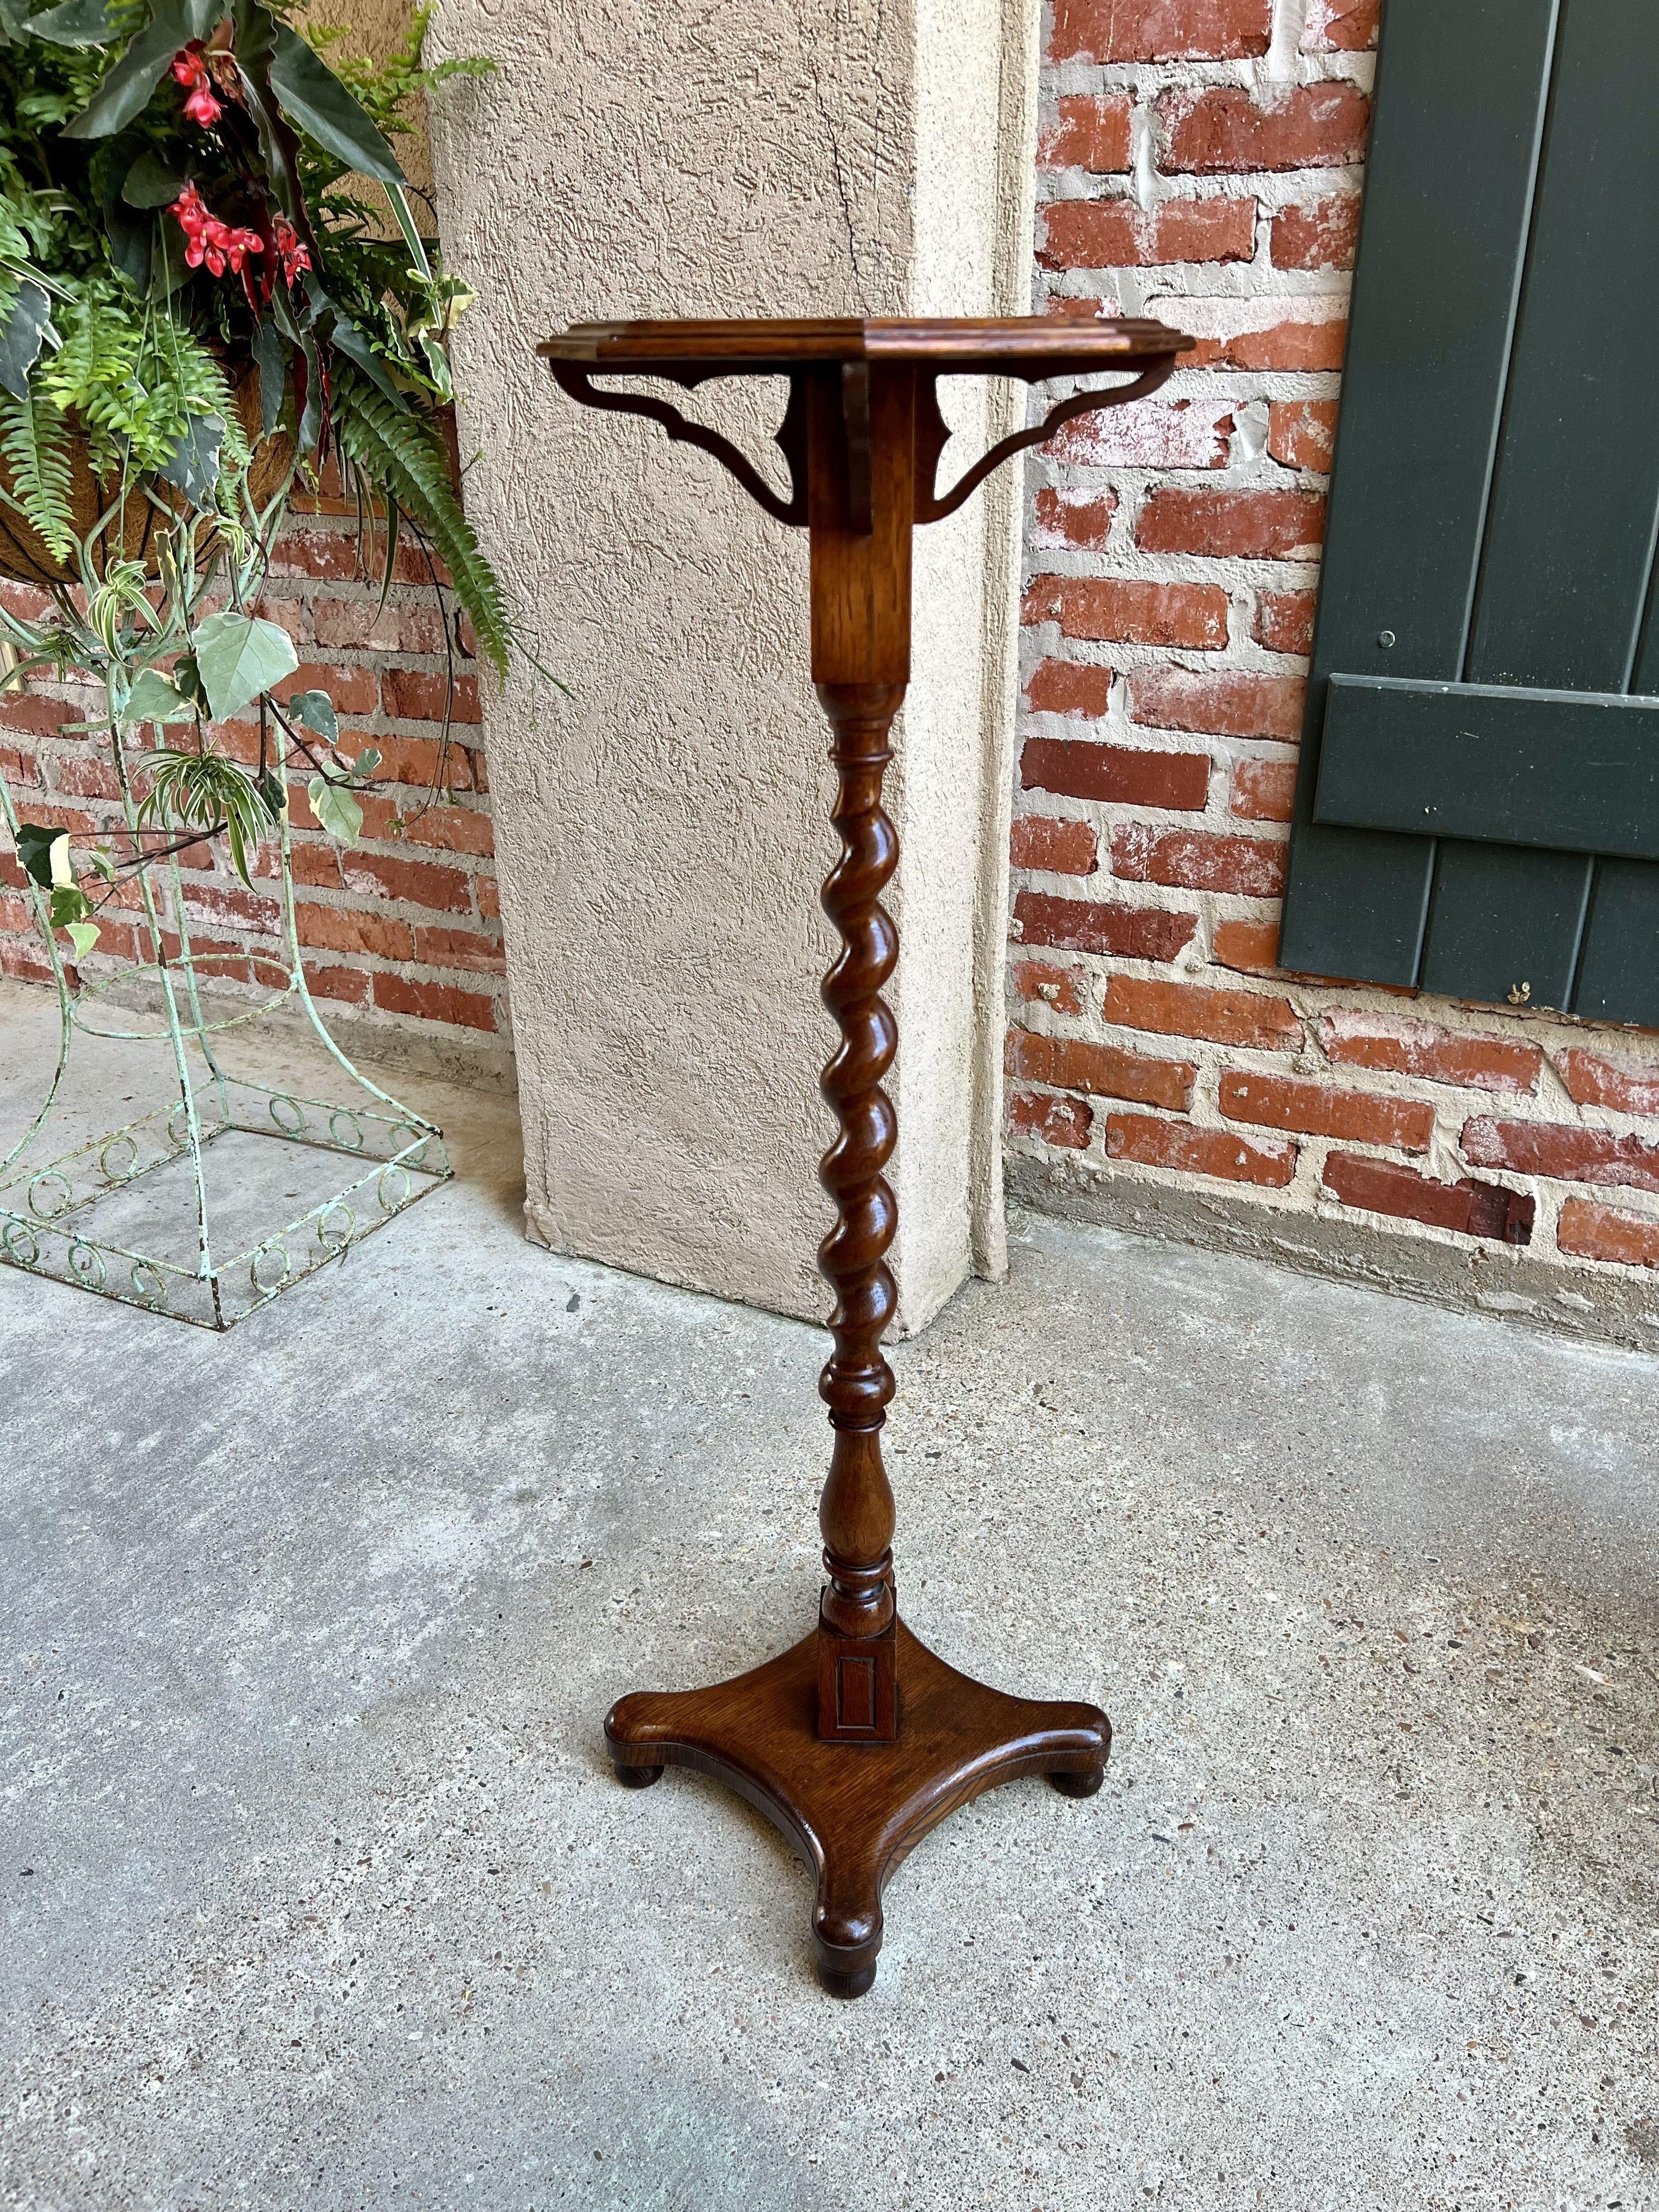 Antique English oak Barley twist pedestal plant bronze display stand octagon table.

Direct from London, a lovely antique English display/plant stand.
Traditional British style, with barley twist pedestal. Inlaid octagon top with scalloped bracket